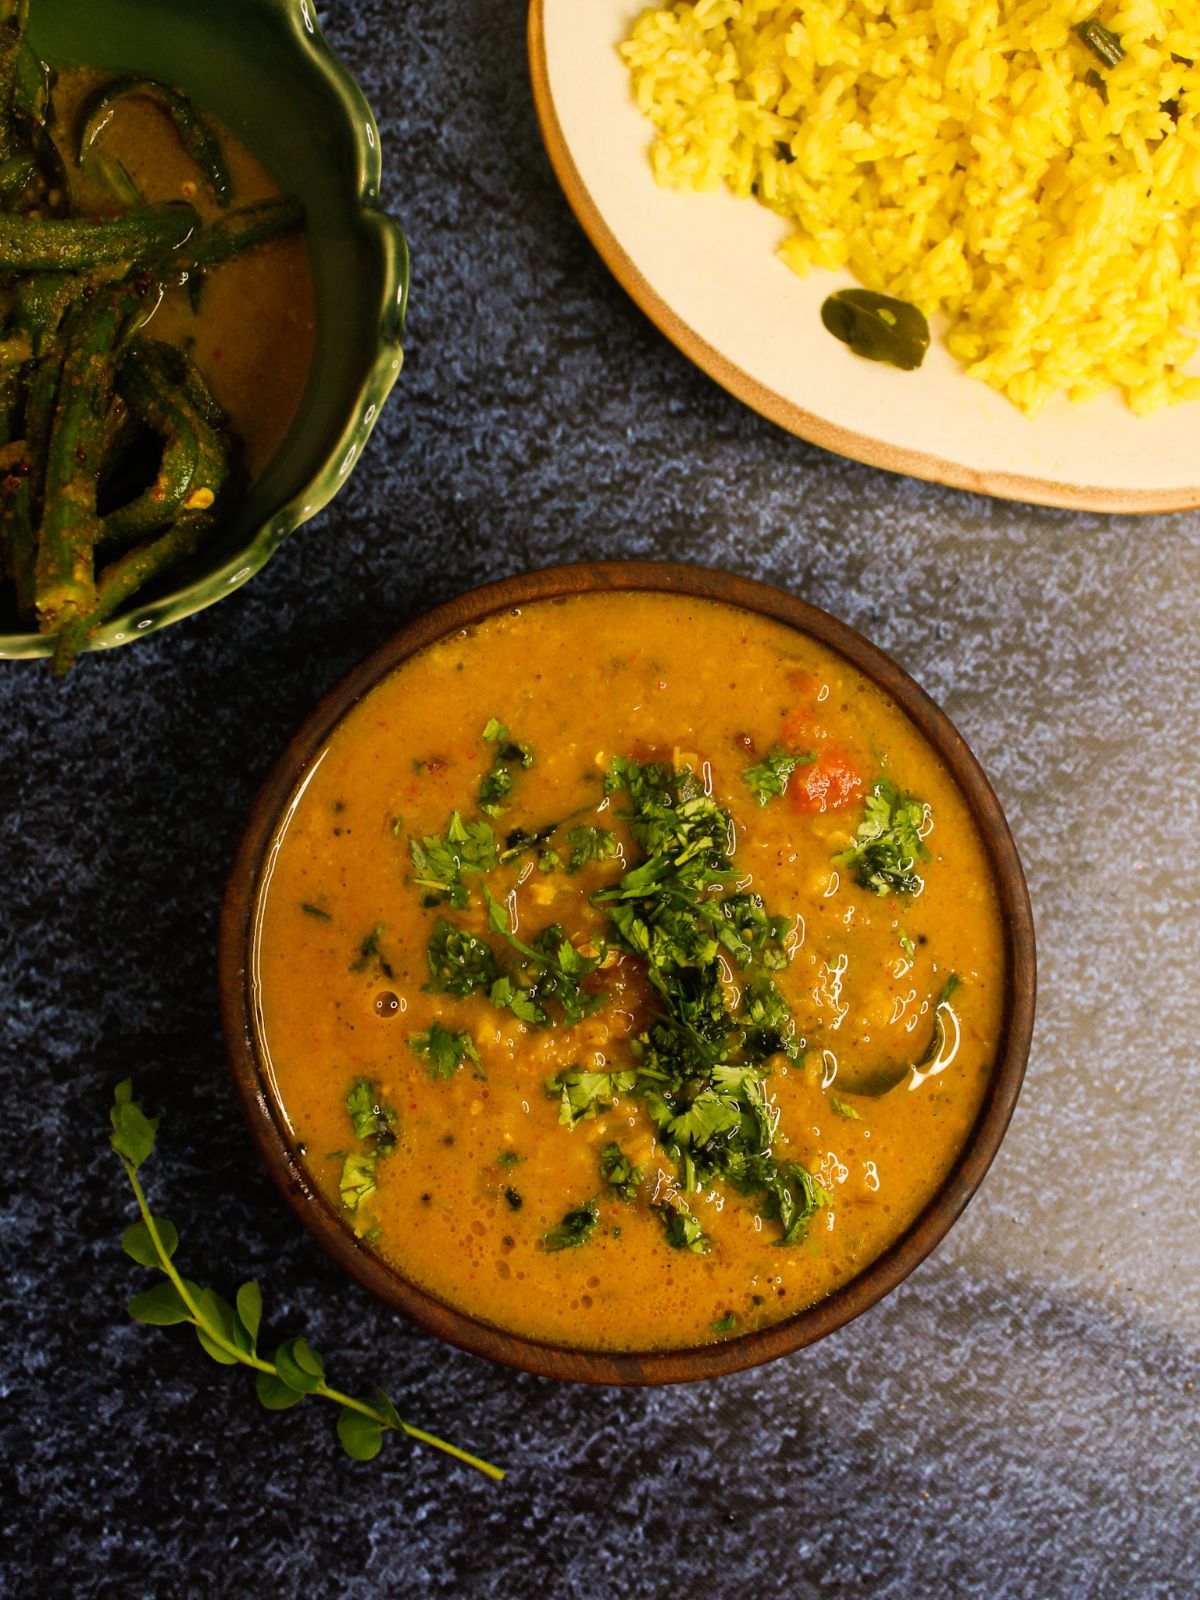 Sri Lankan Dal Curry garnished with mint leaves and served with yellow lemon rice